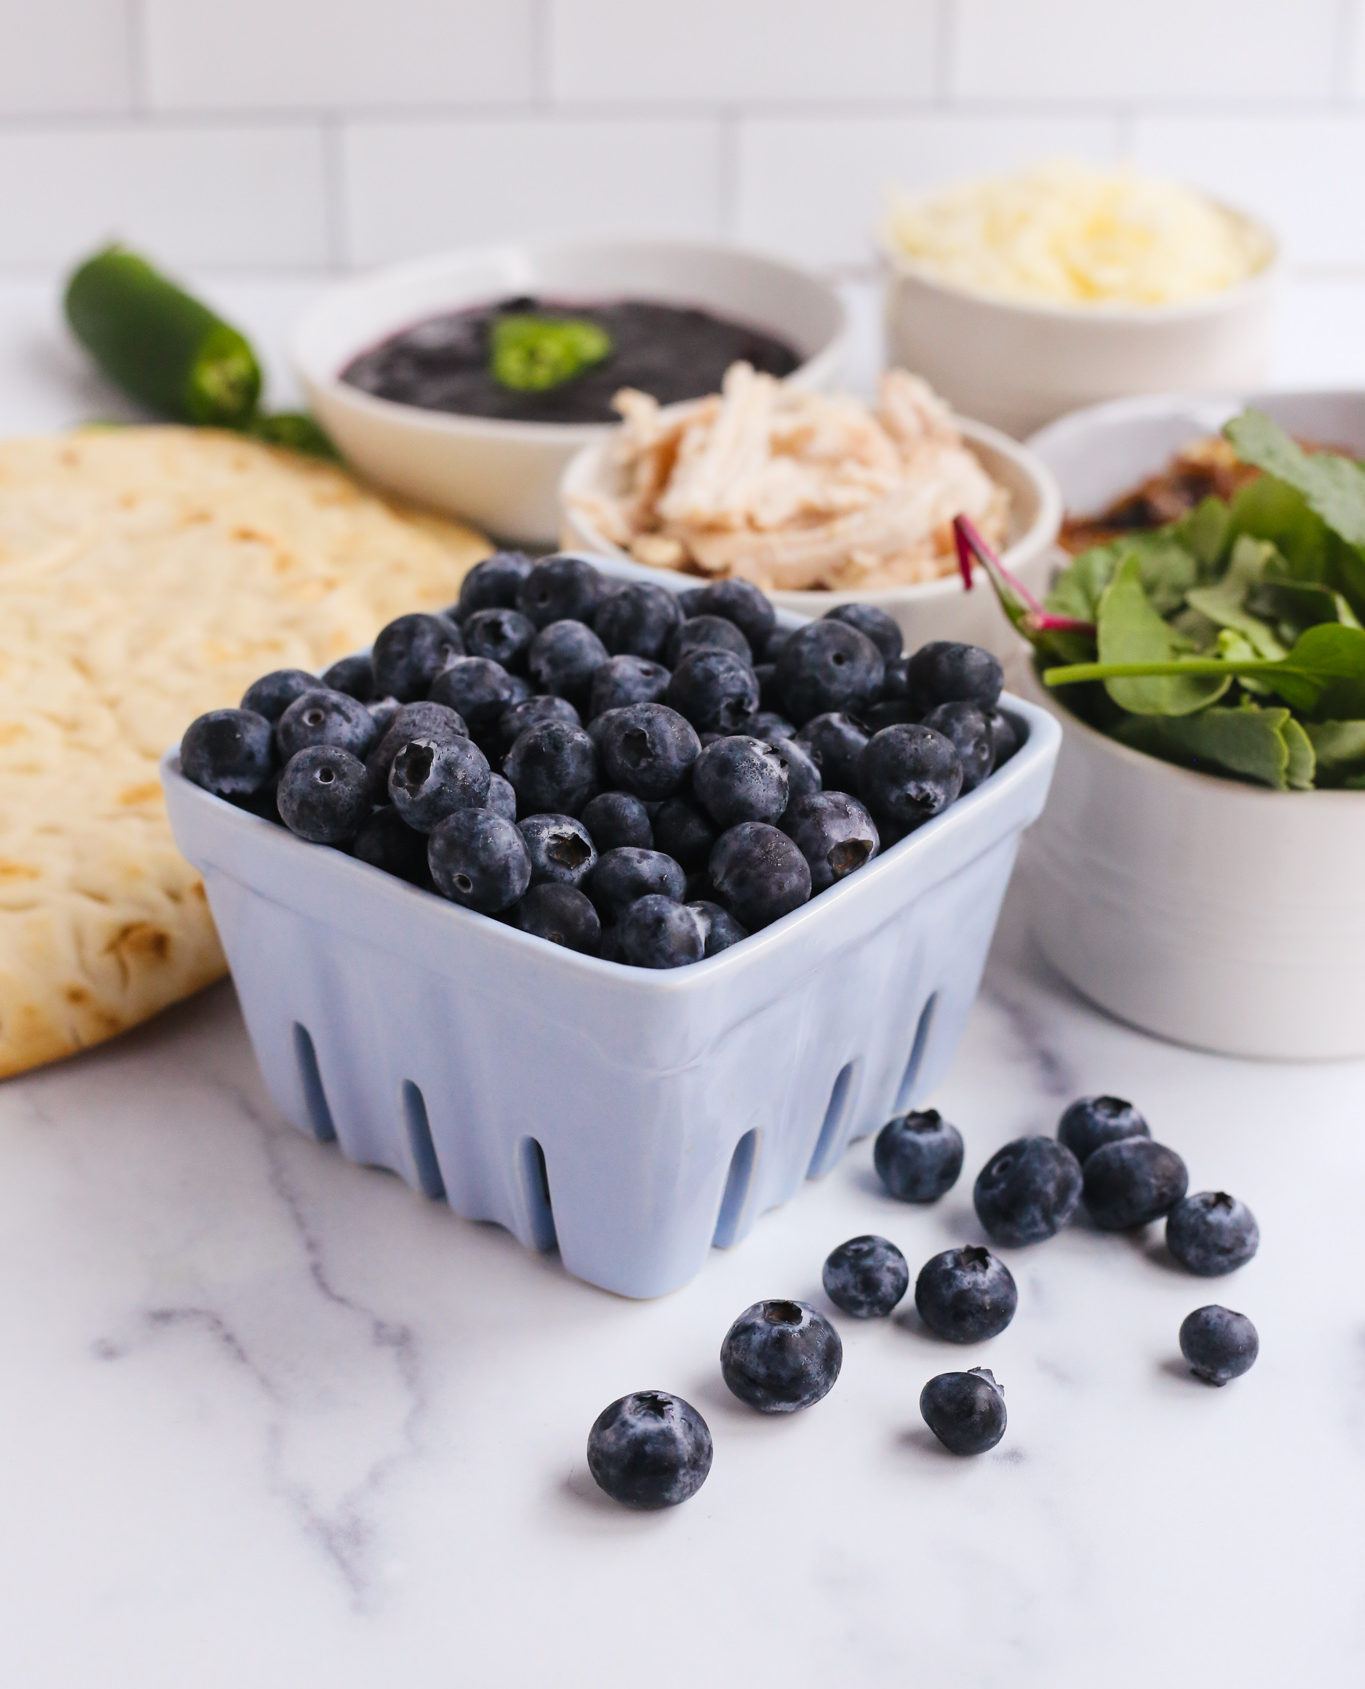 A light blue ceramic bowl holding fresh blueberries, along with other ingredients on a kitchen counter for chicken flatbread ideas for summer